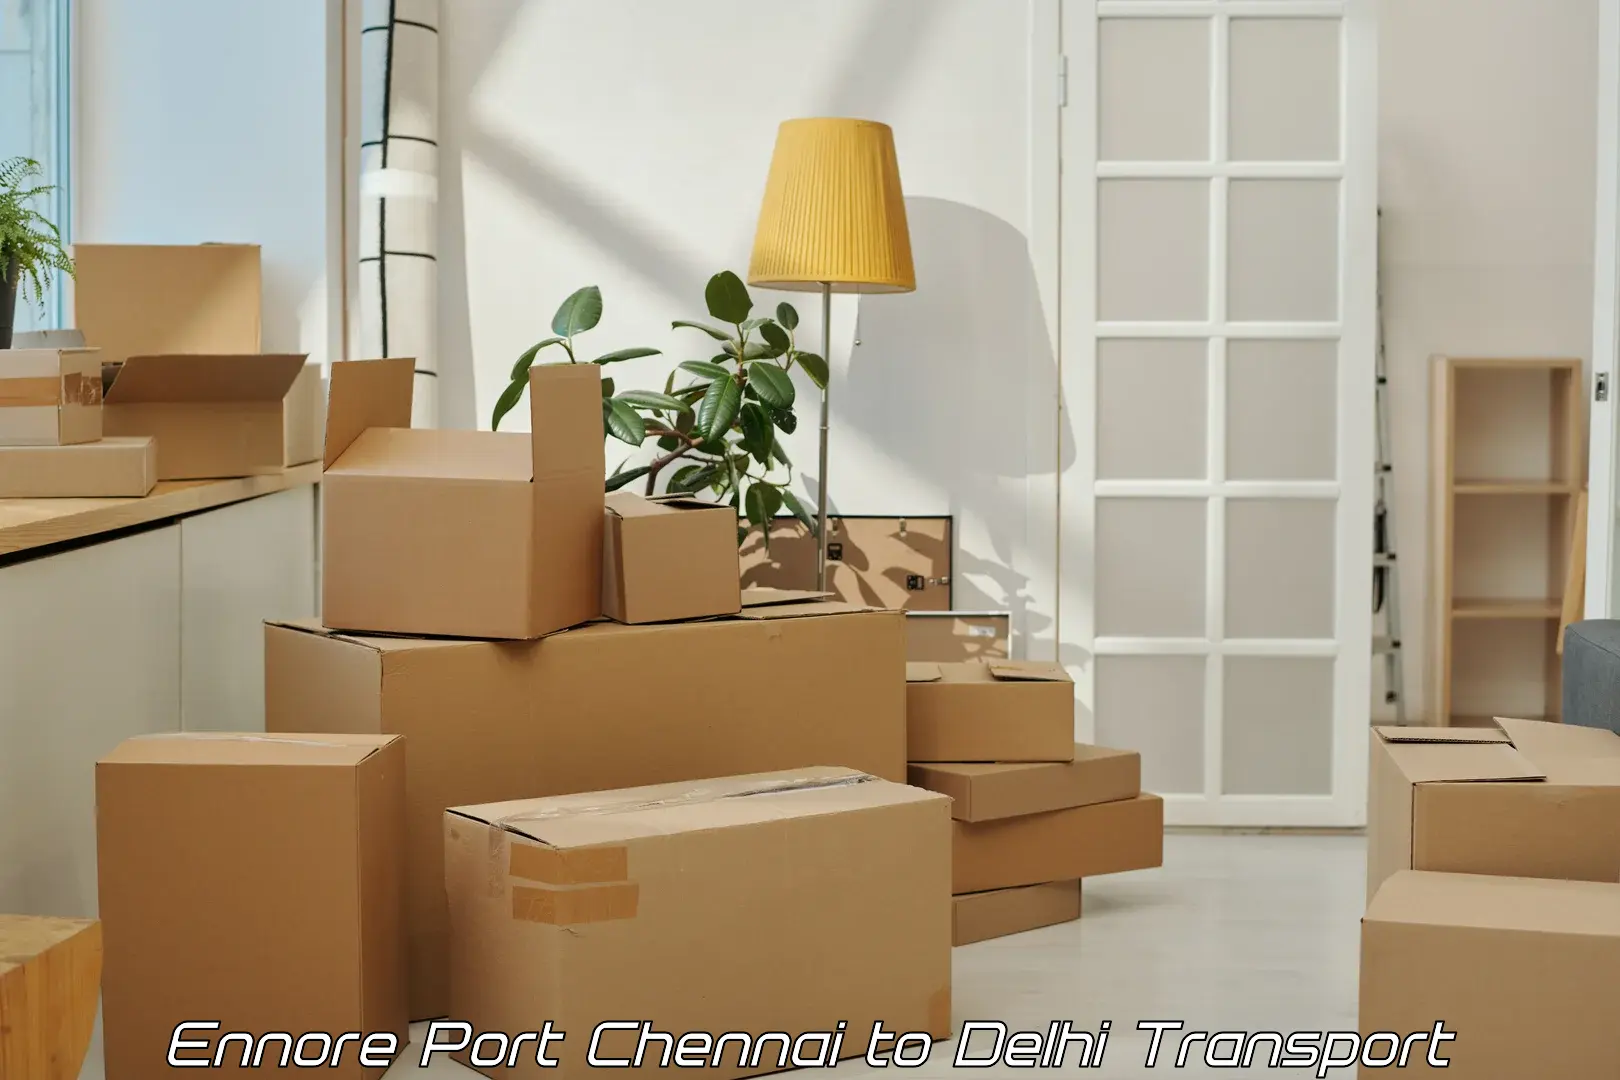 Package delivery services Ennore Port Chennai to Delhi